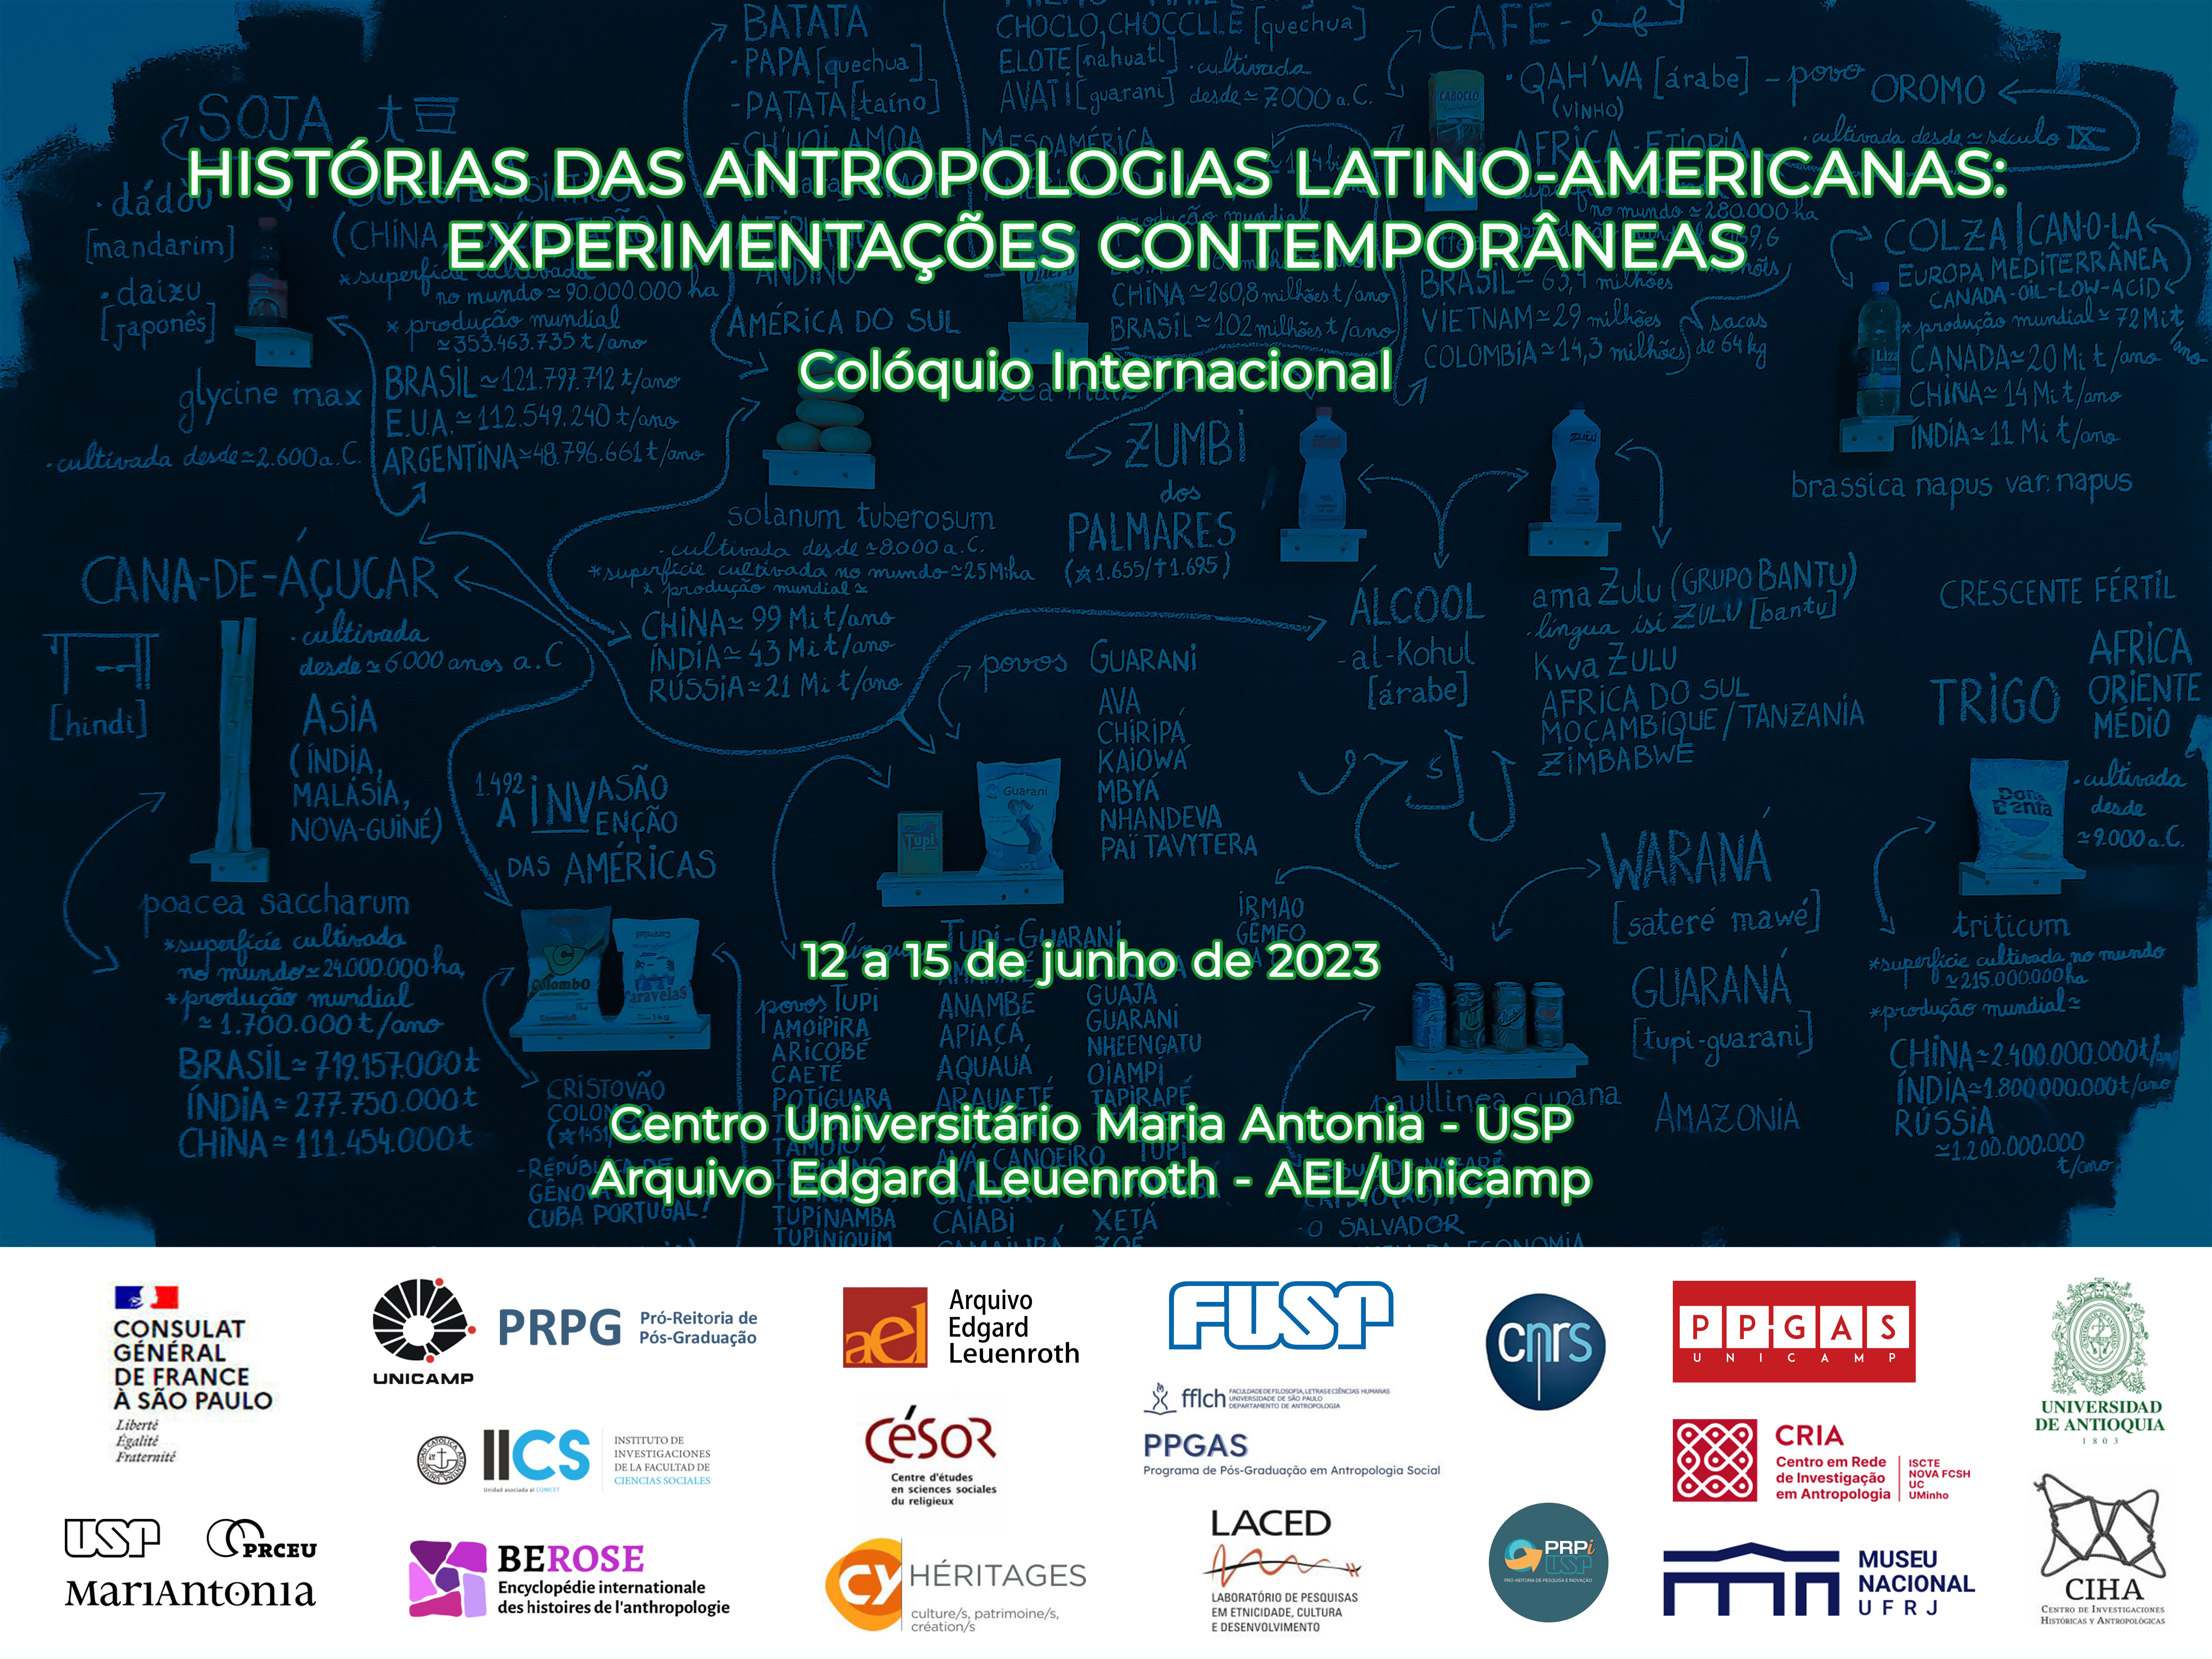 Histories of Latin American Anthropologies: Contemporary Experimentations", from June 12th to 15th, at the Maria Antonia University Center (USP) and at Unicamp (June 15th).